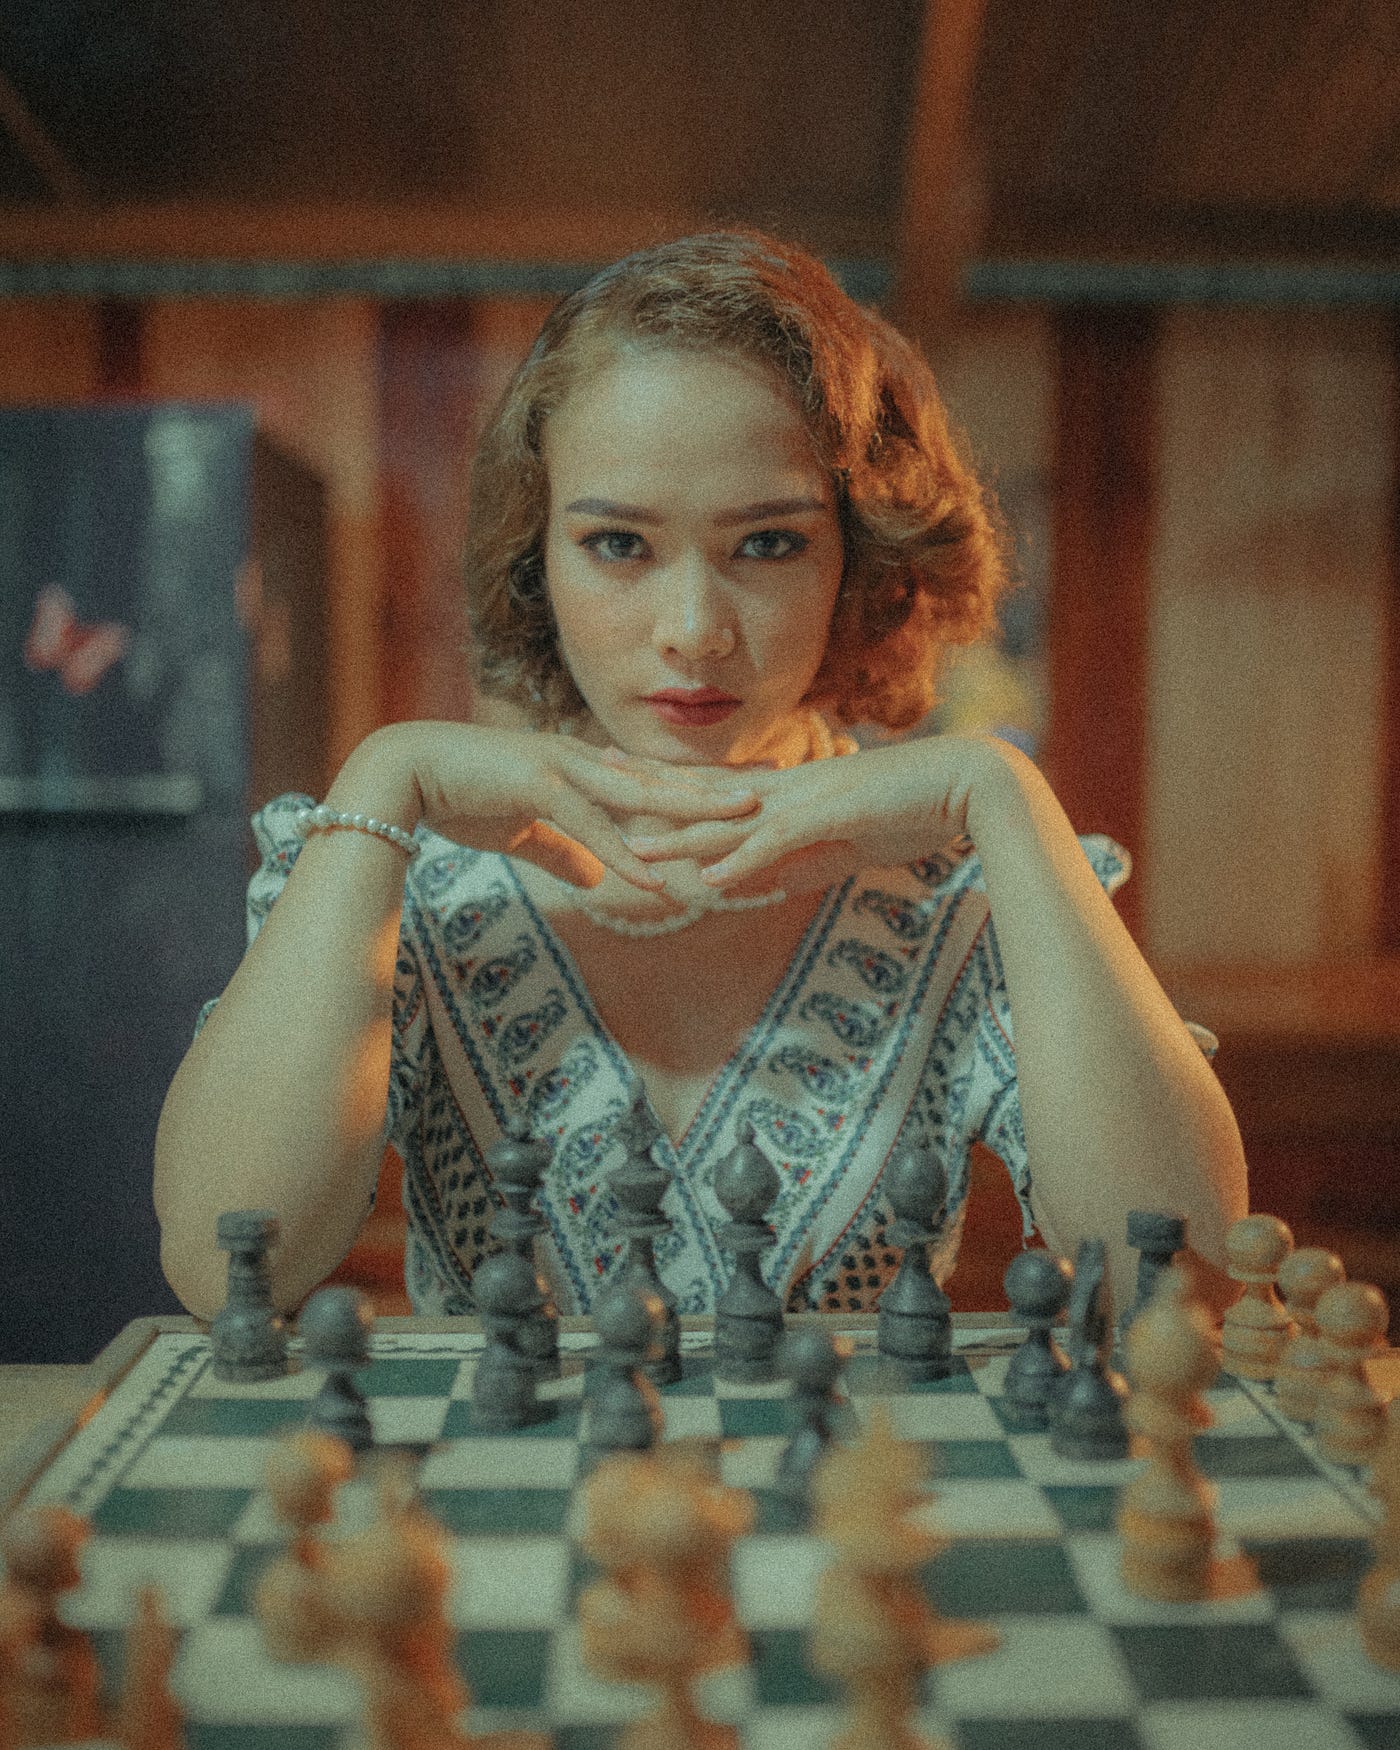 Three reasons why you should play chess · The Badger Herald